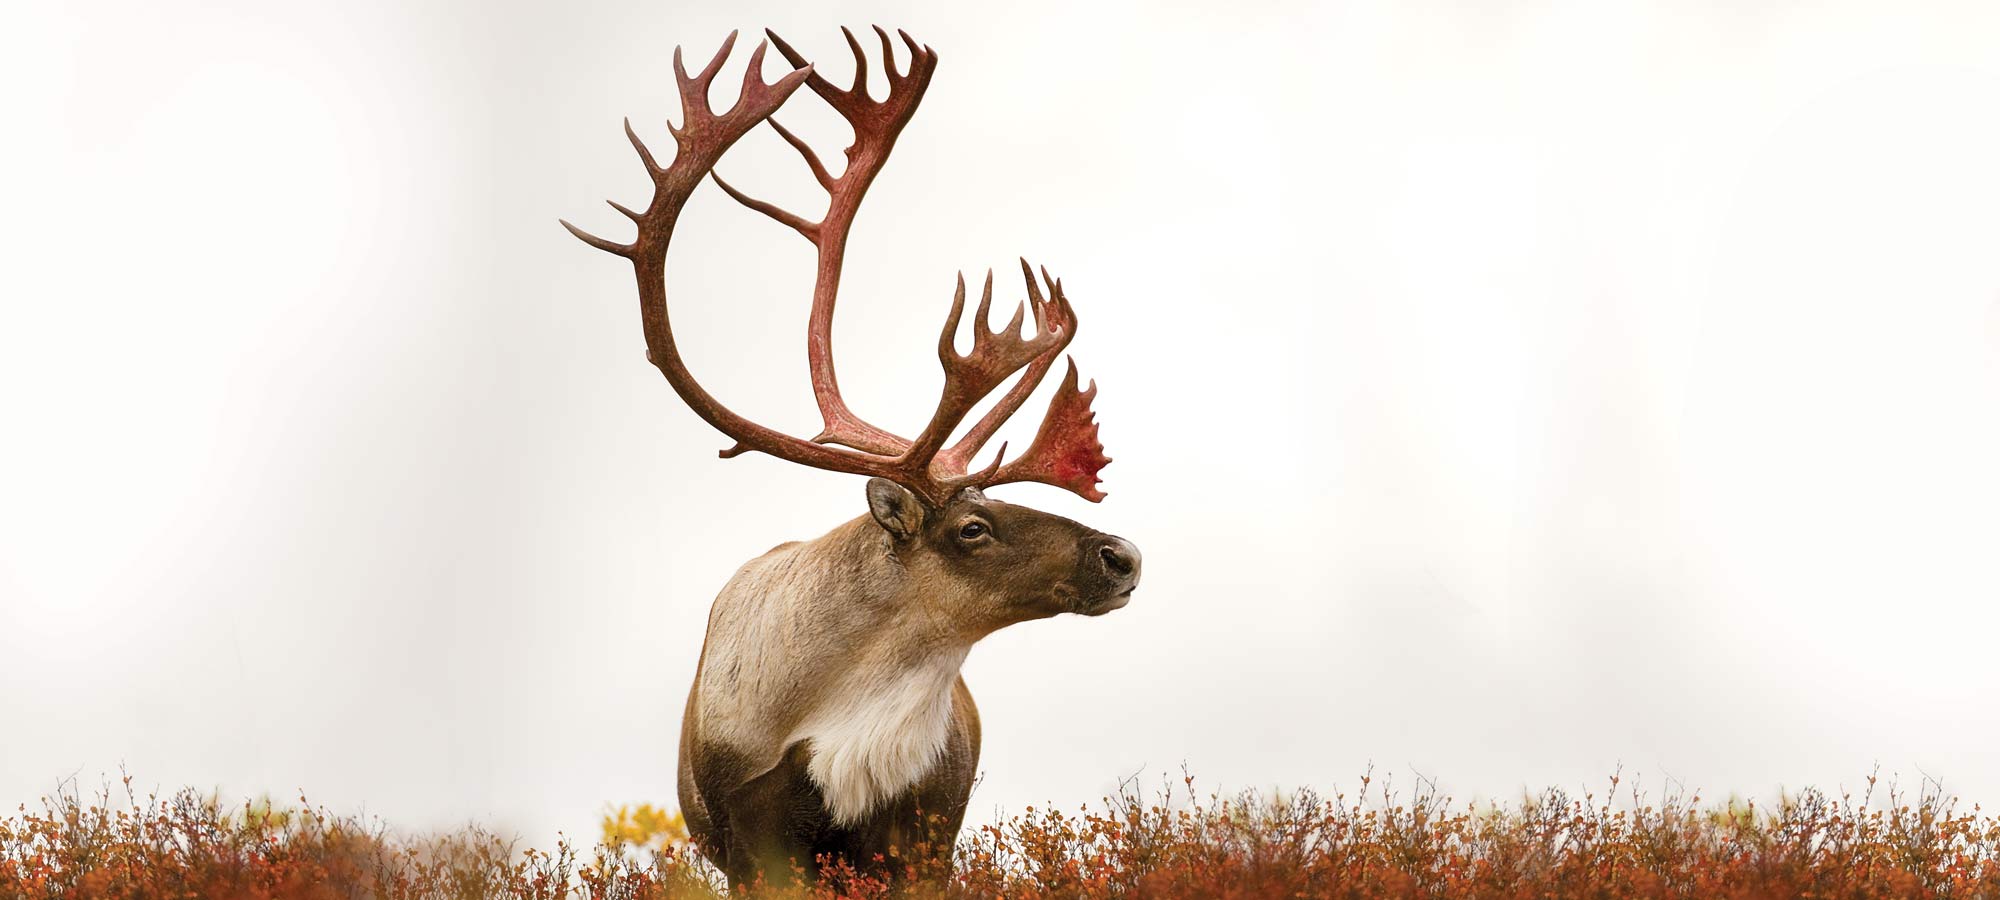 one caribou standing alone in a field